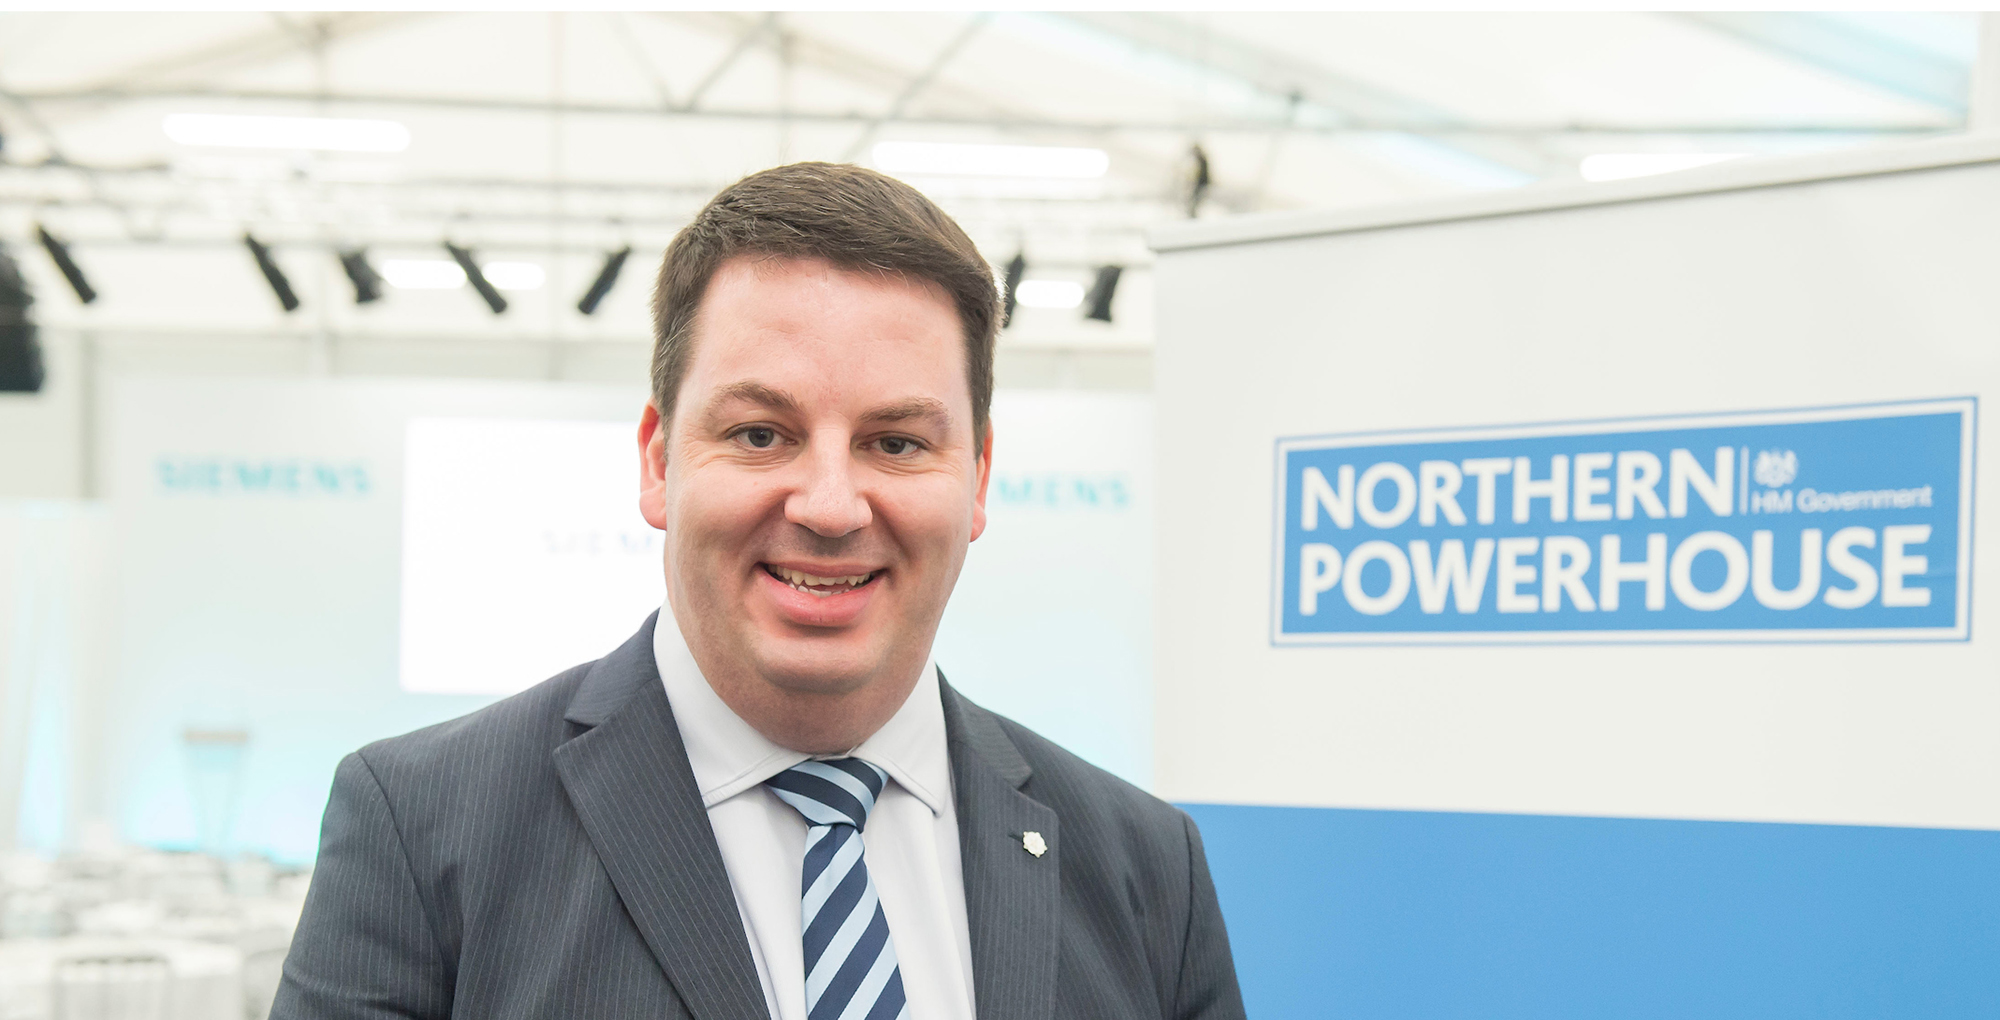 Andrew Percy MP, Minister for the Northern Powerhouse